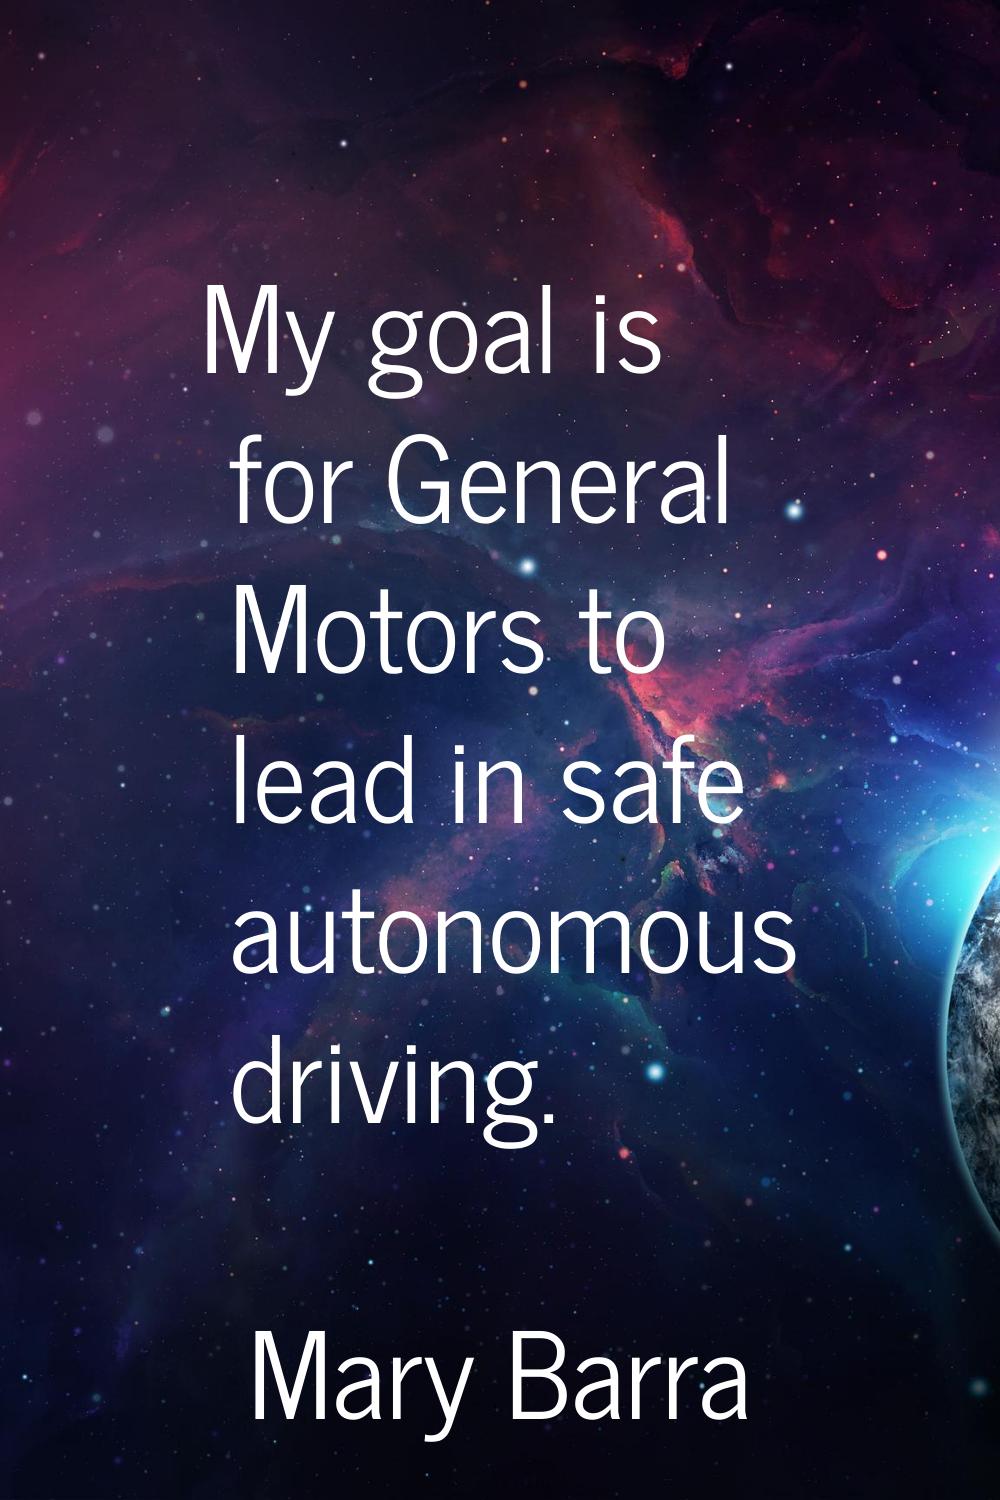 My goal is for General Motors to lead in safe autonomous driving.